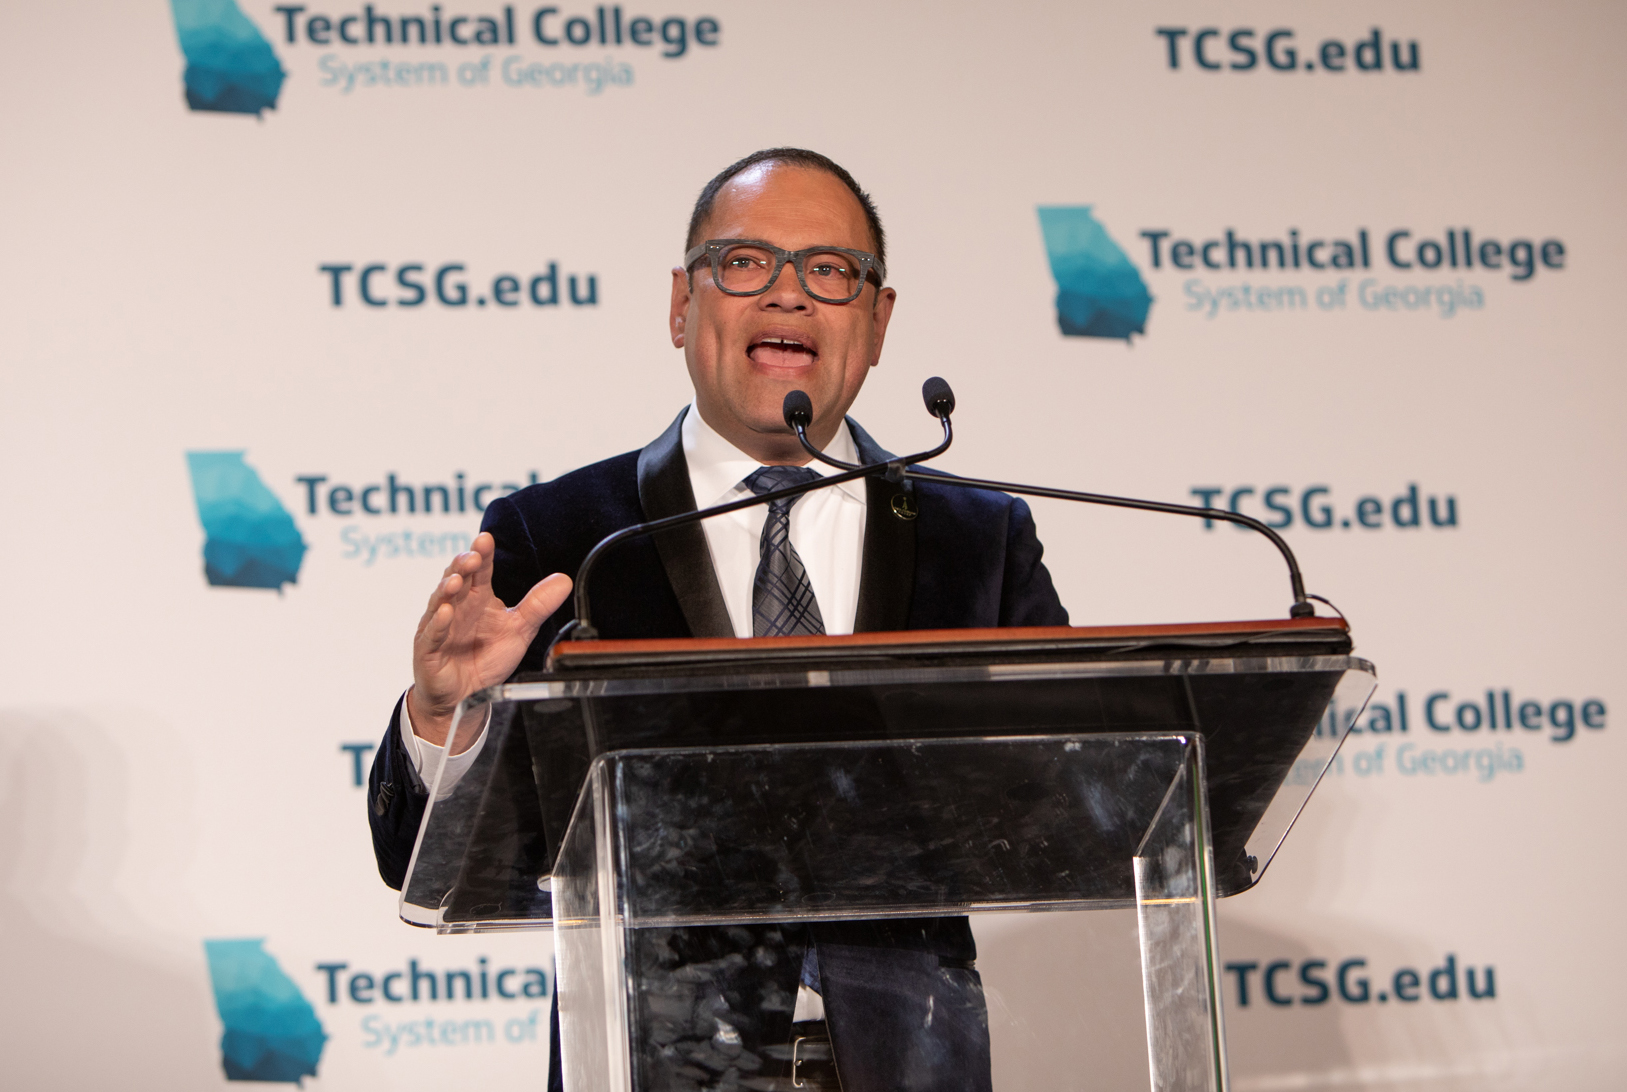 Leyner Argueta, program director of Business Management at GNTC, gives his acceptance speech after being selected as the 2019 Rick Perkins Instructor of the Year for the Technical College System of Georgia. Argueta will be the keynote speaker for GNTC’s 2019 Spring Commencement Ceremony.